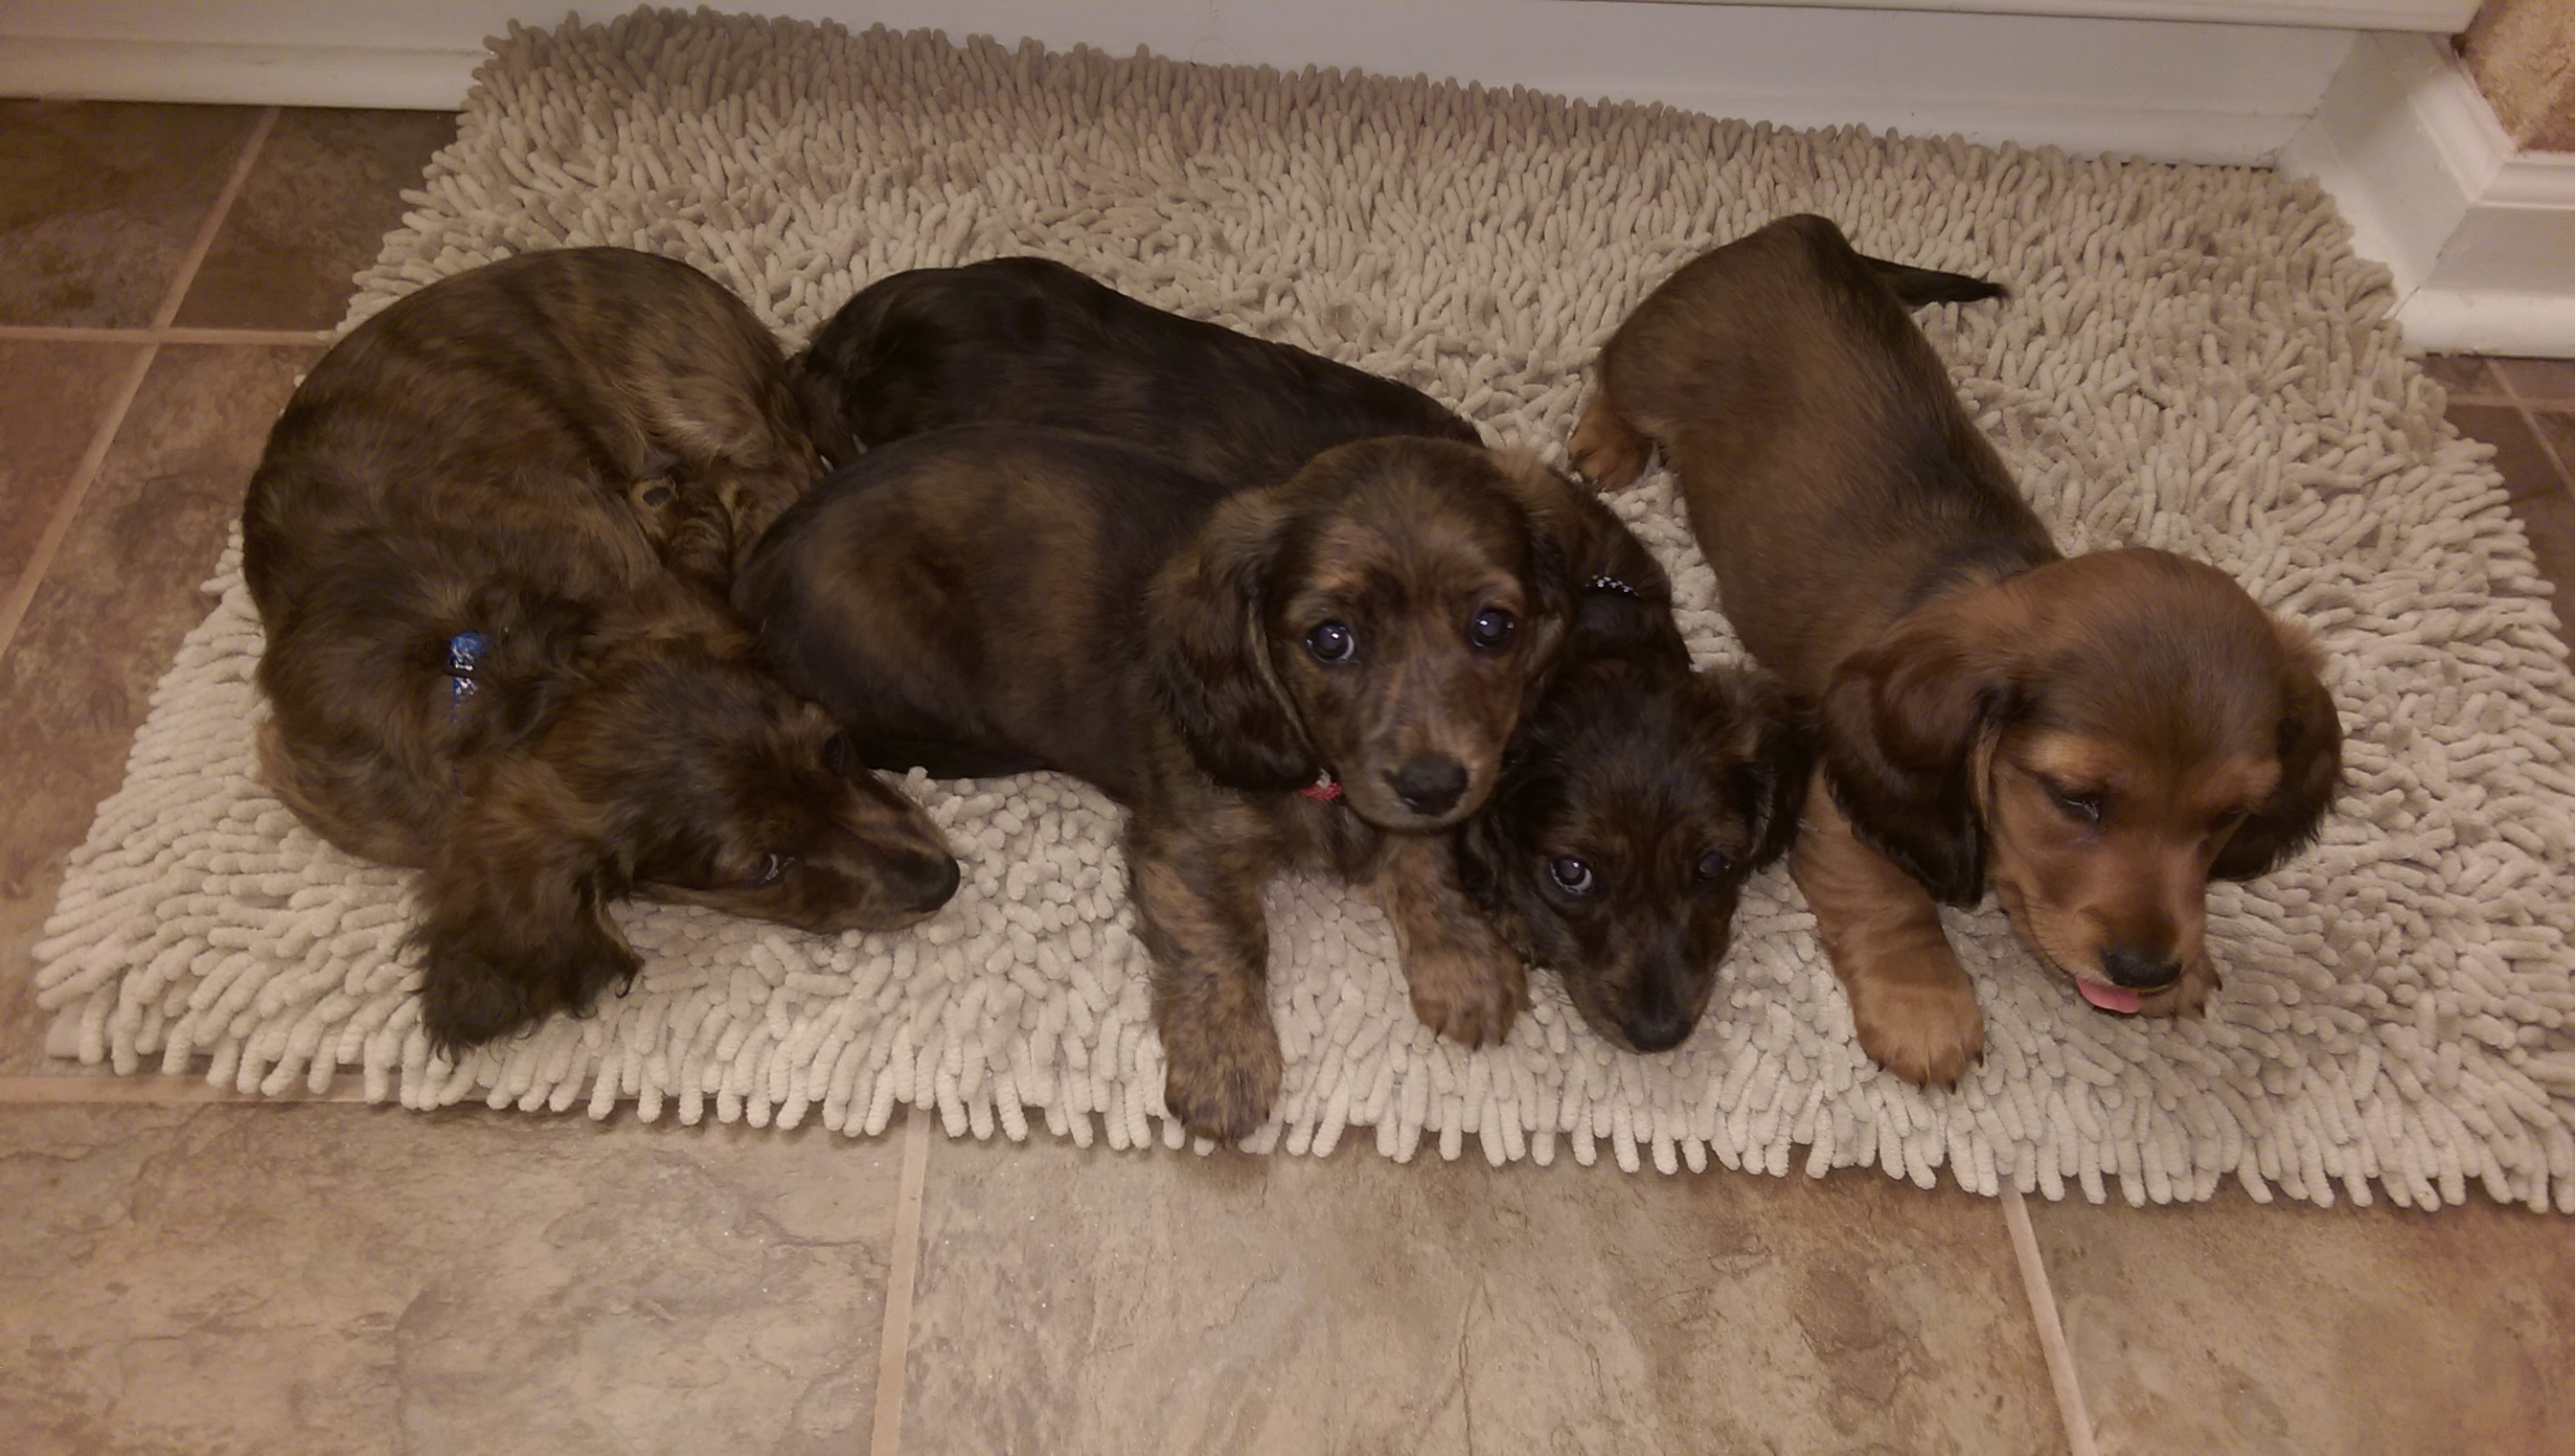 Credit: Image taken by me. These are my adorable miniature Longhaired Dachschund puppies!